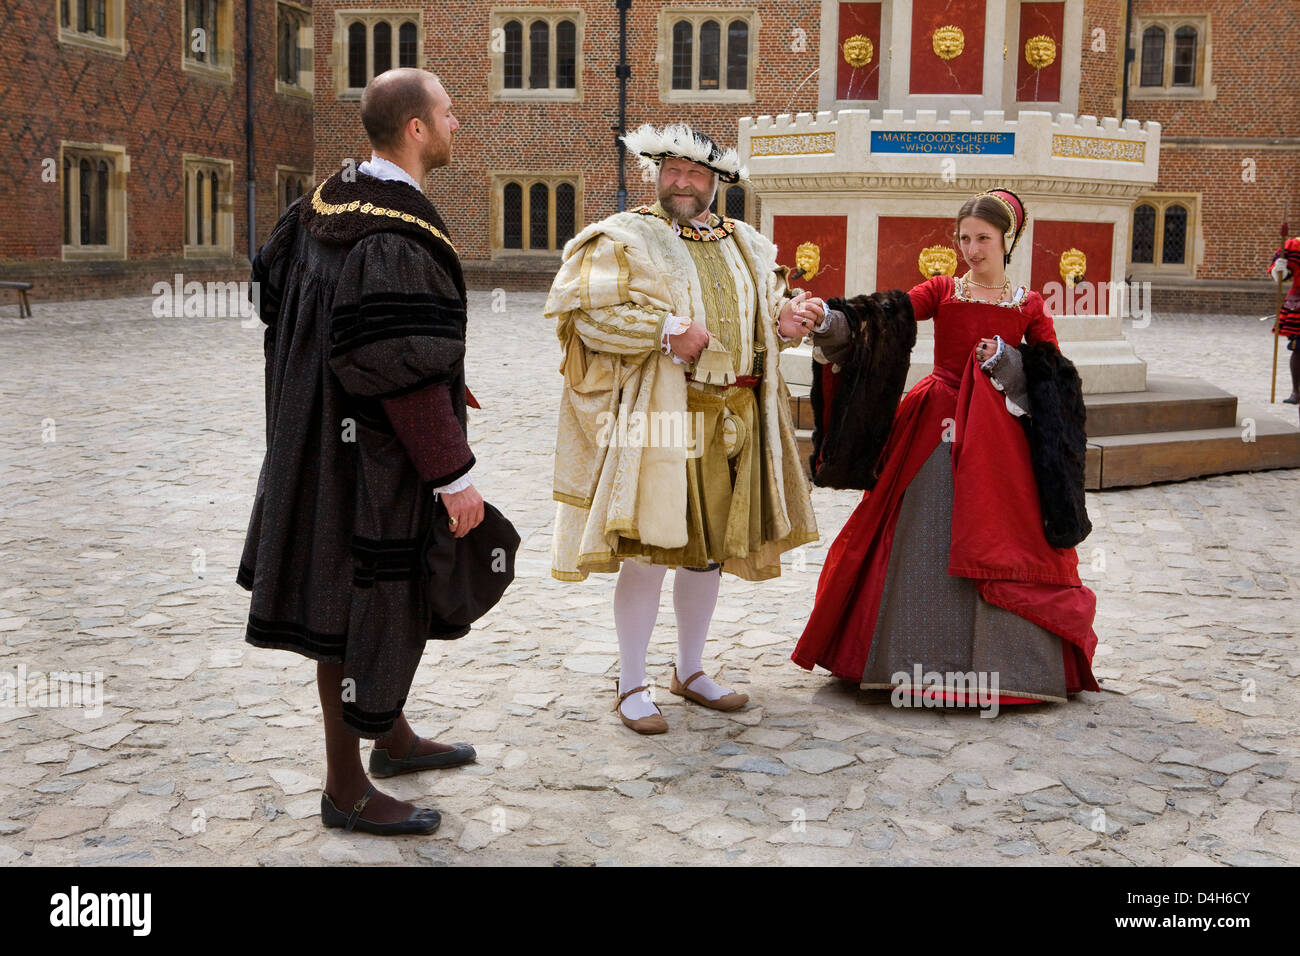 King Henry VIII and Catherine Howard in 1540, portrayed by actors, in the Base Court, Hampton Court Palace, Surrey, England Stock Photo